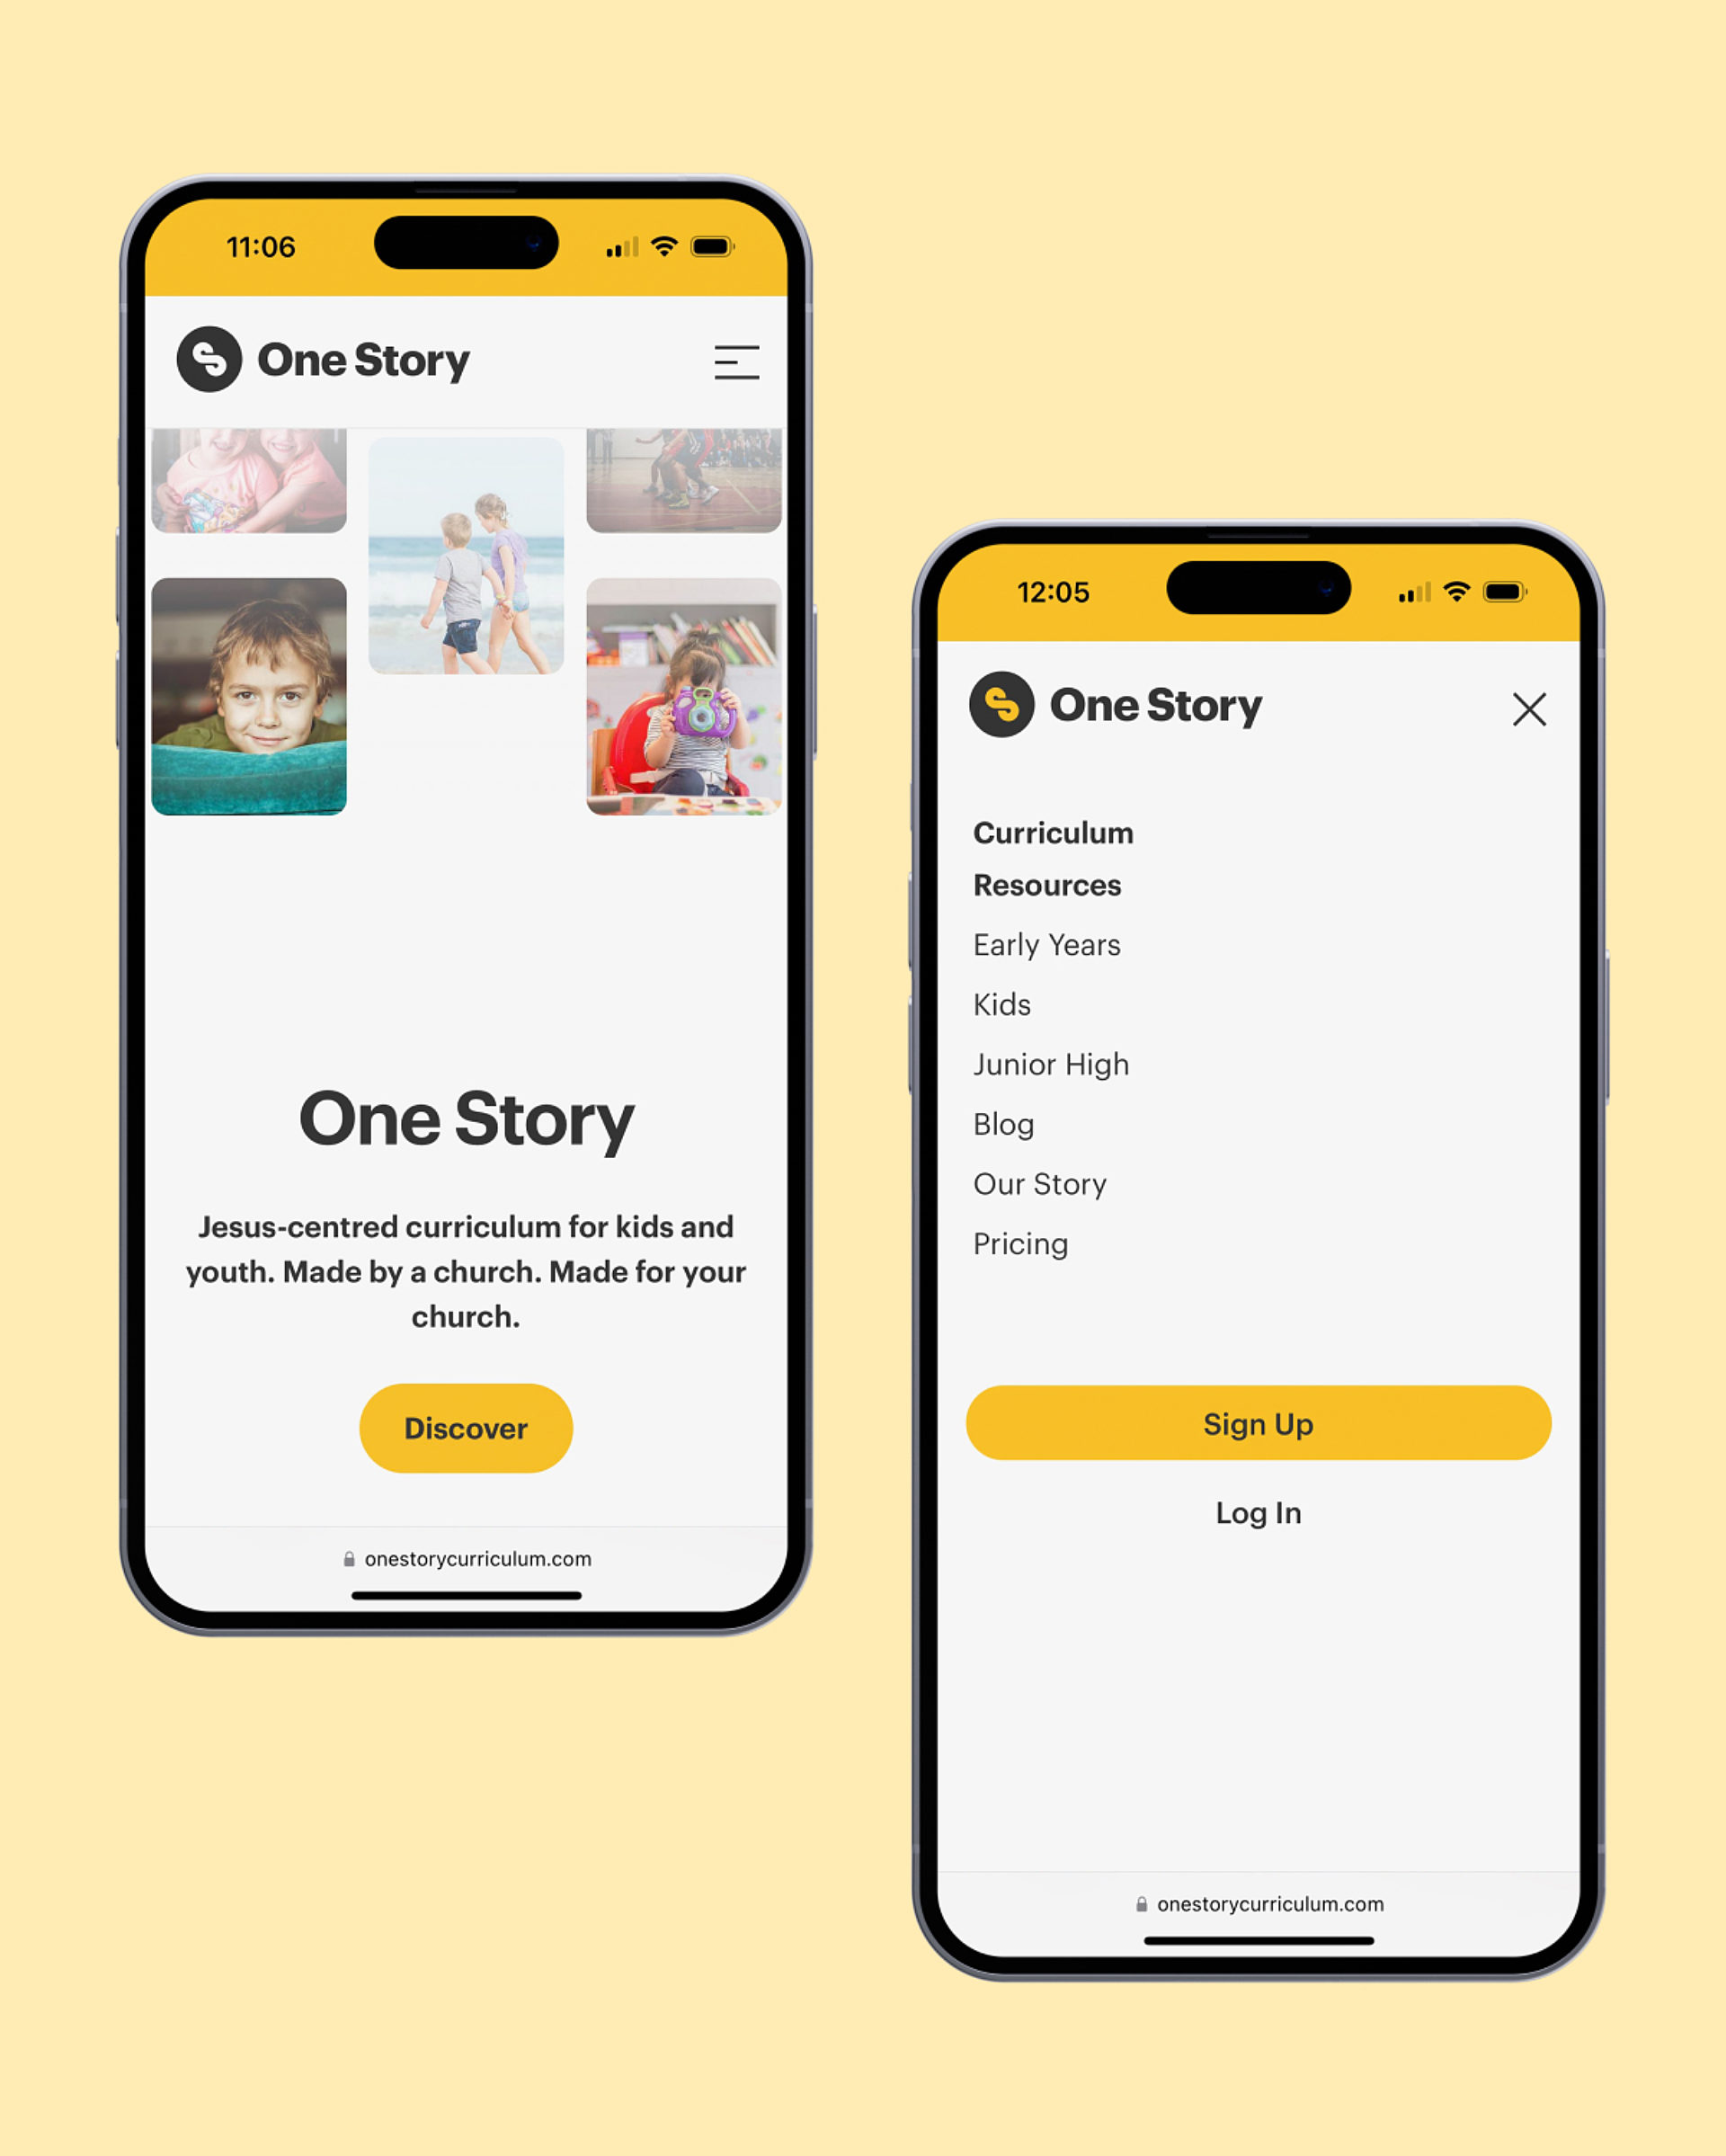 The One Story home page and the One Story site menu on a mobile device.